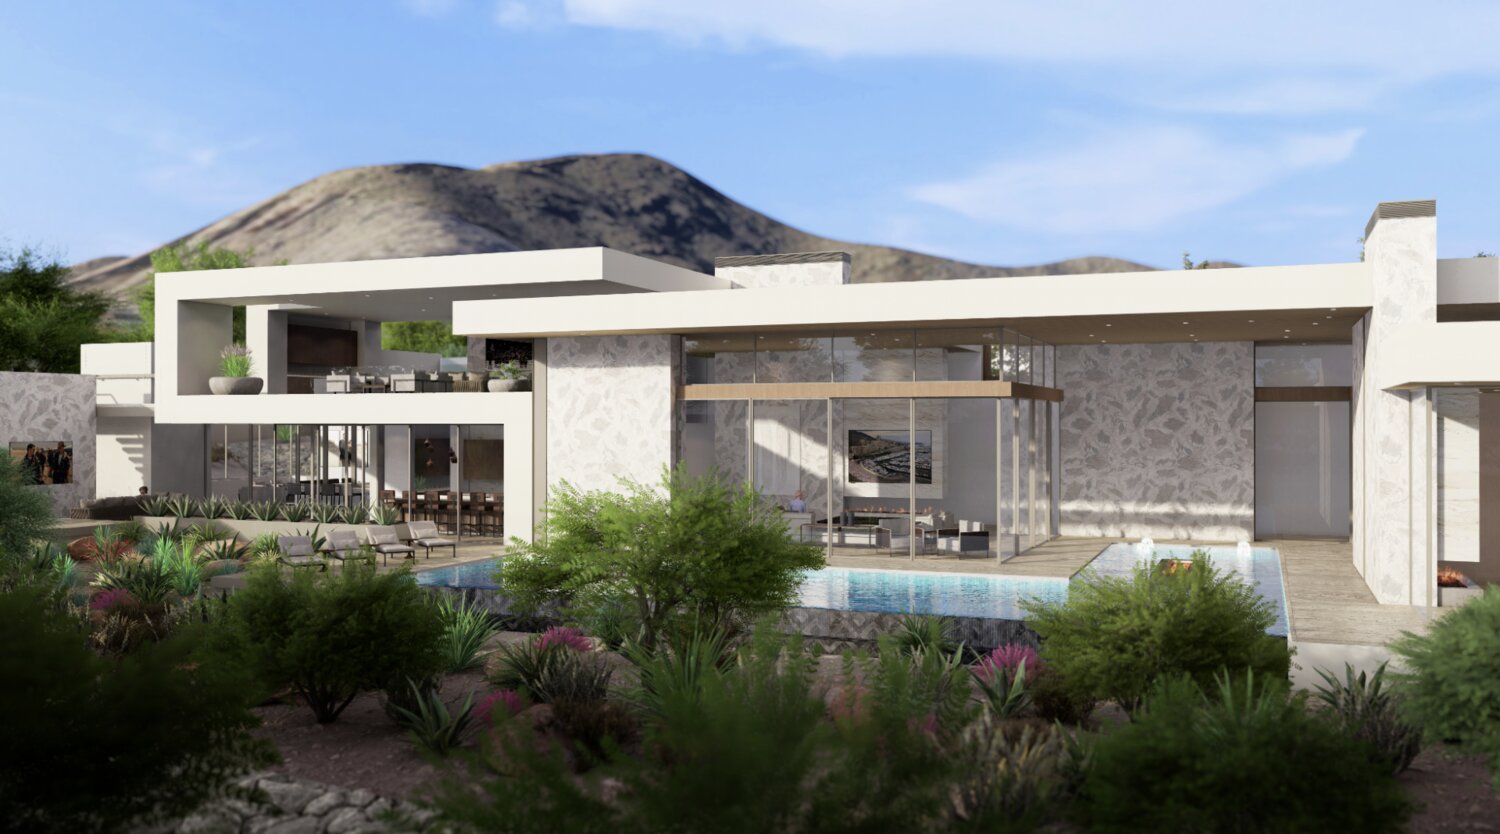 Scottsdale-based developer Silver Sky Development has announced Aquarius, the $17 million, CP Drewett-designed home named for the “water carrier” of the zodiac. Aquarius is the third release for the 12-property development taking shape at the base of Mummy Mountain in Paradise Valley.